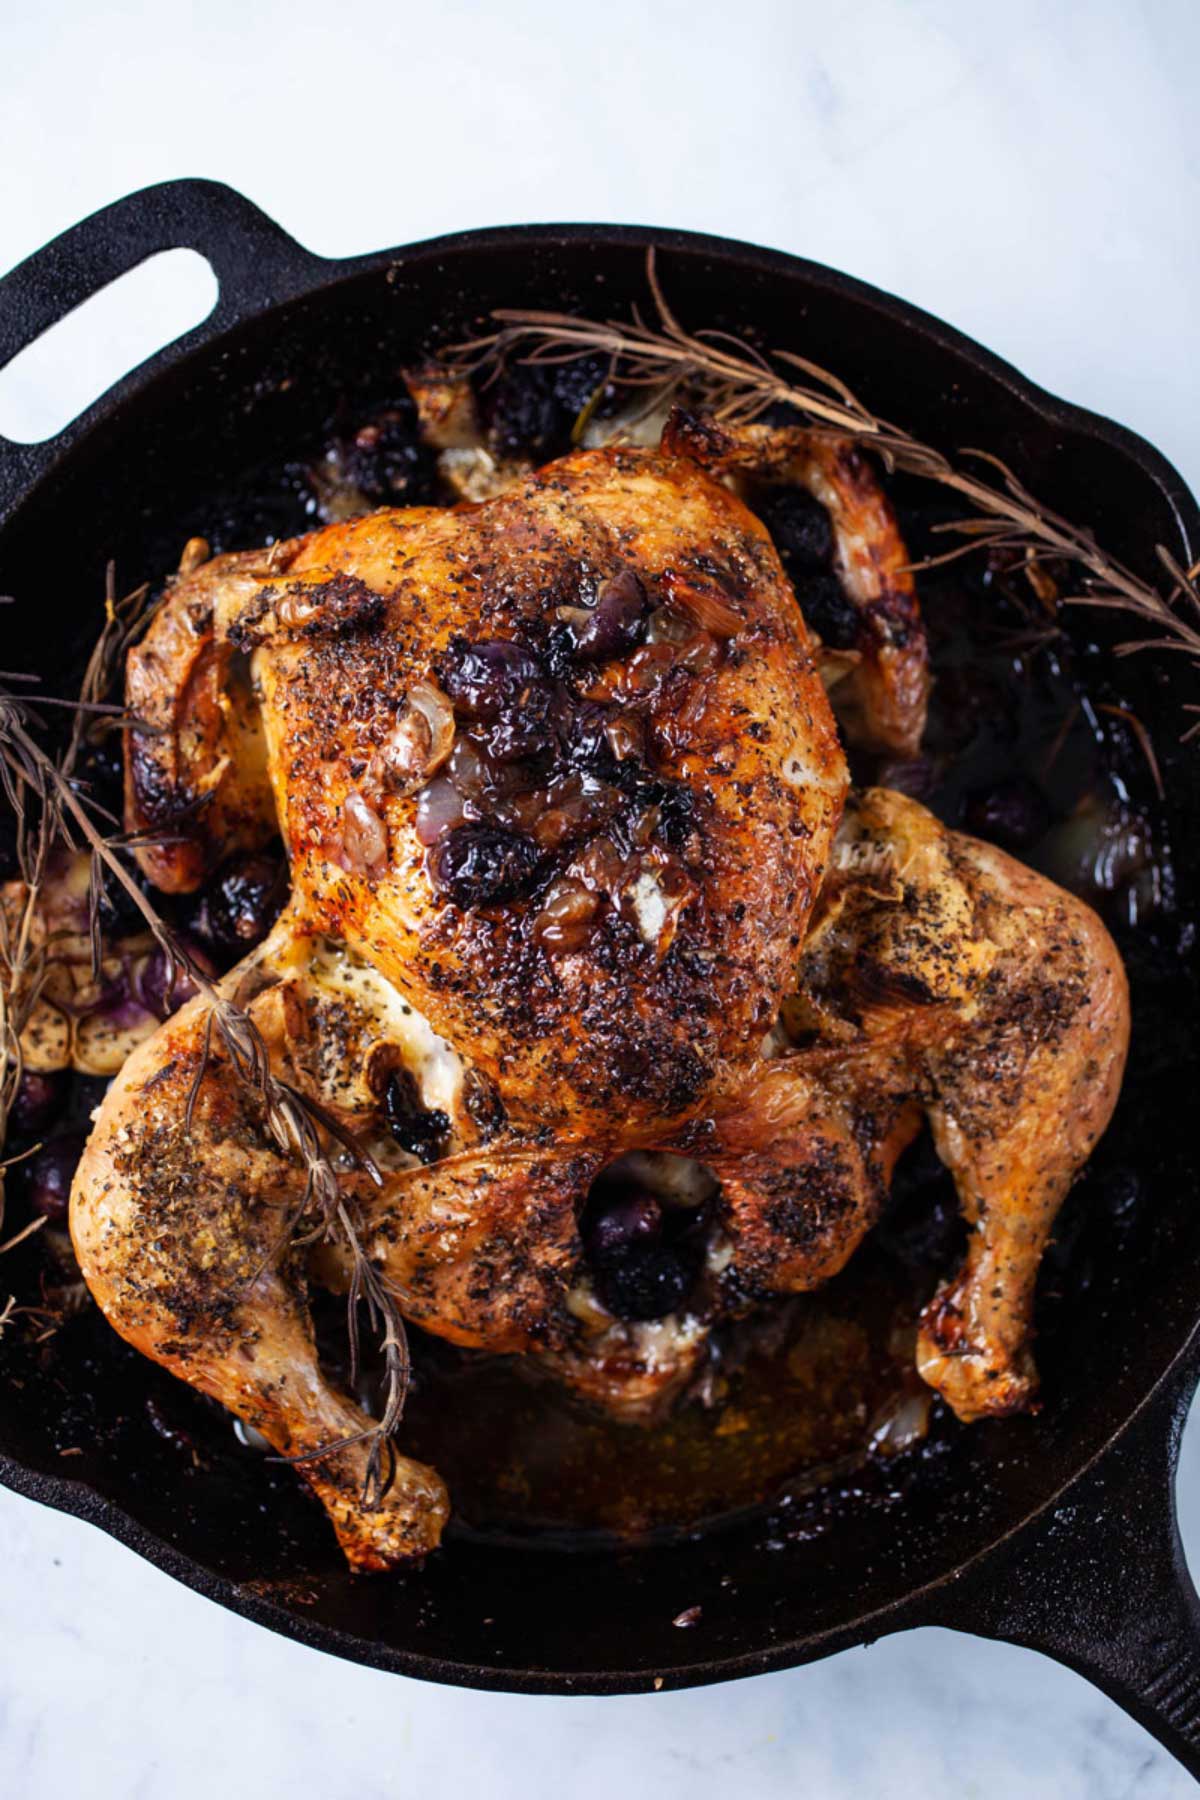 One whole roasted browned chicken in a cast-iron pan with pan juices.